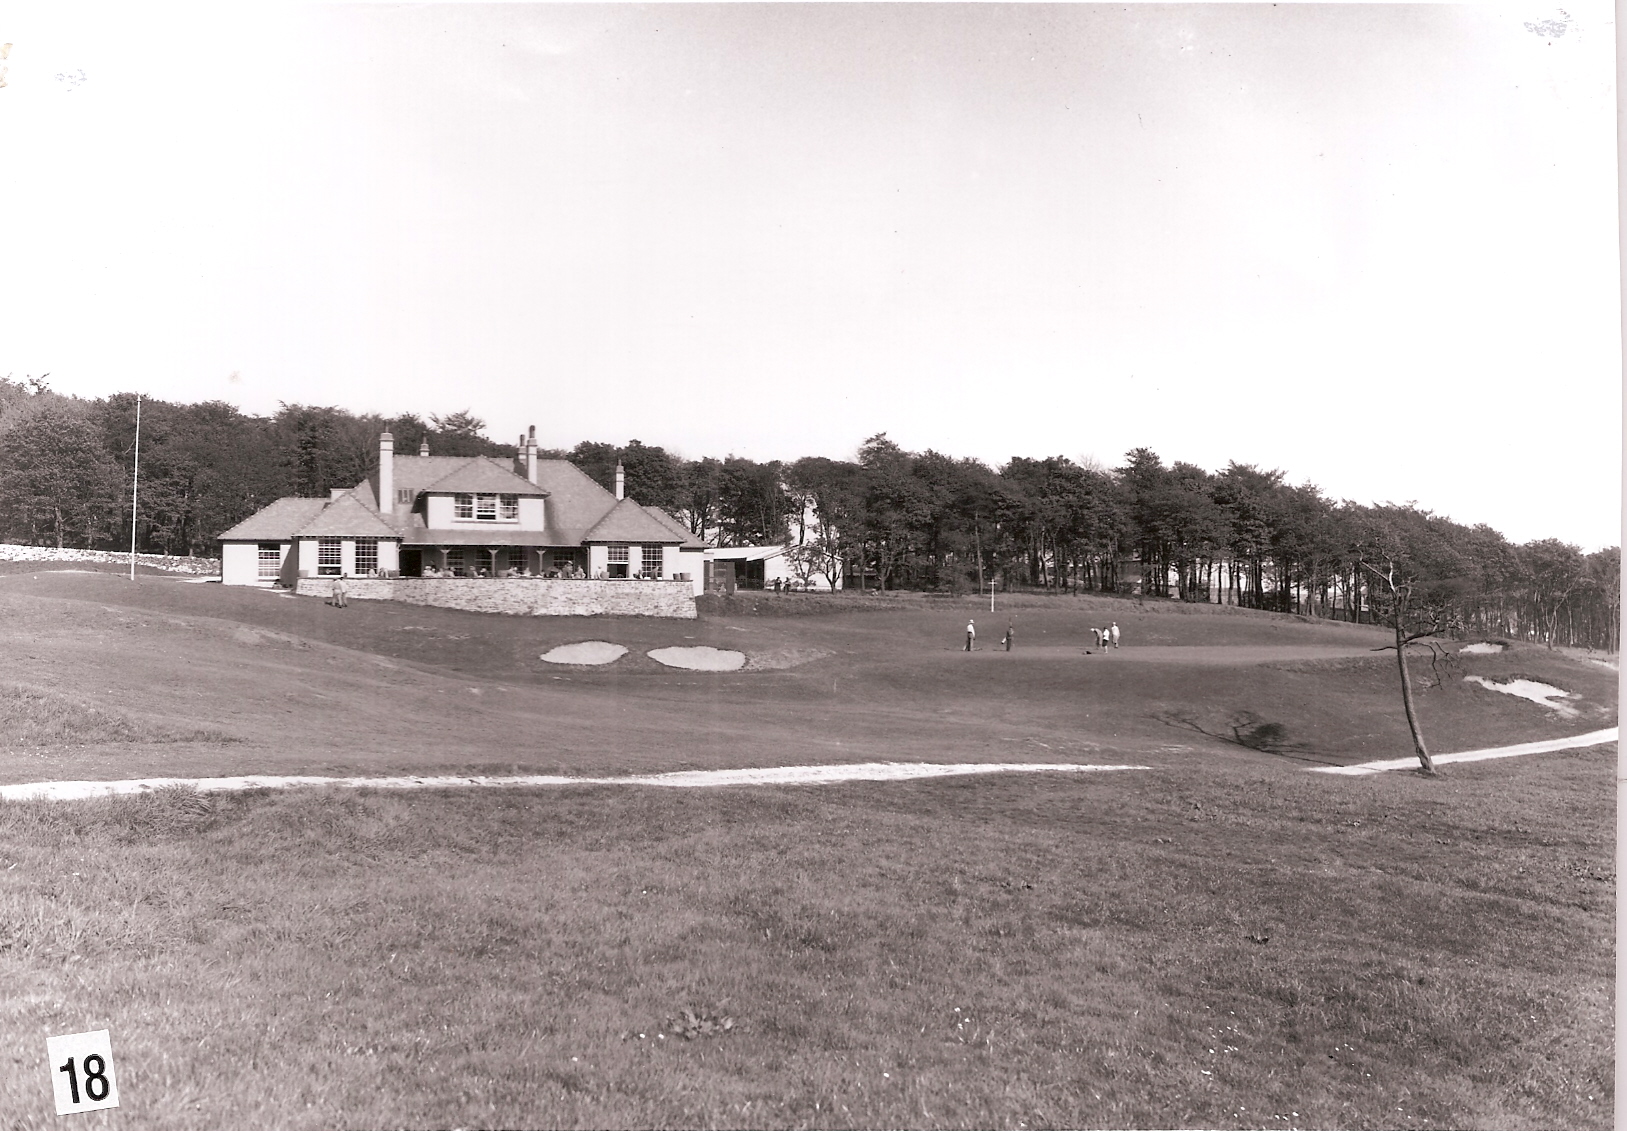 Original image of the Clubhouse and 18th green at Cavendish Golf Club